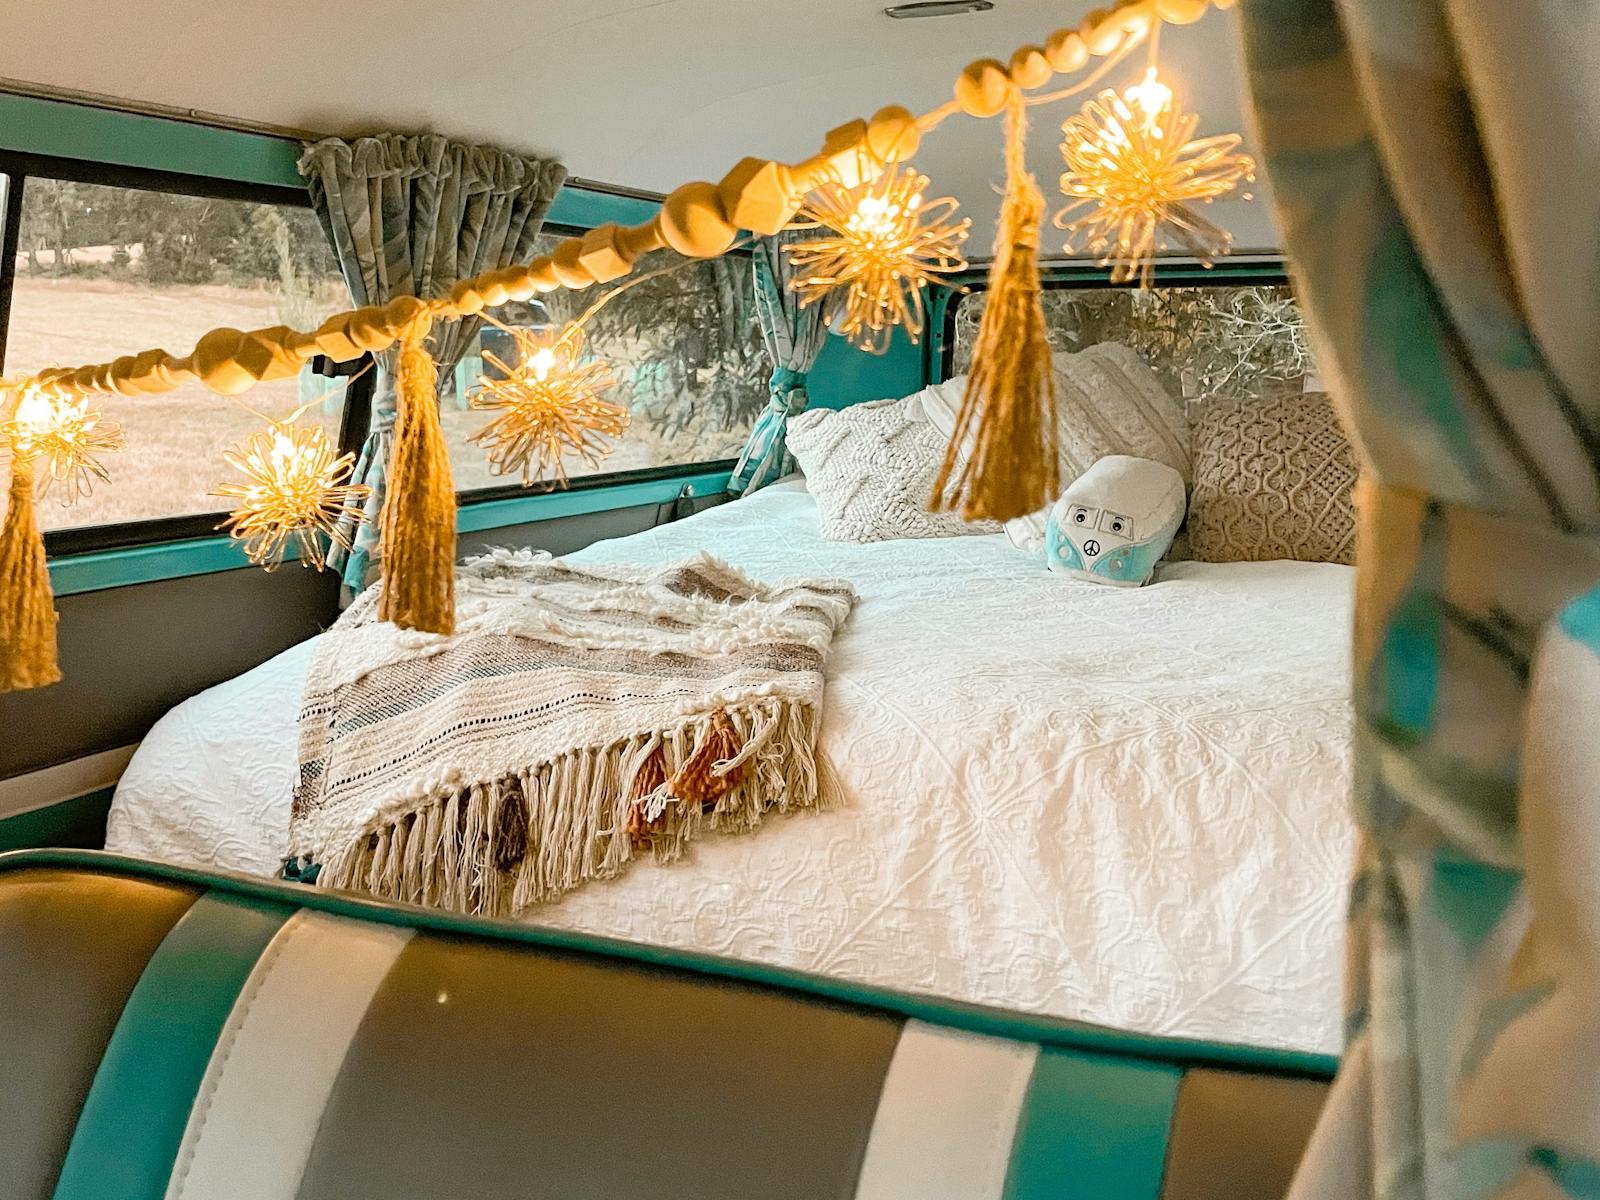 Interior of kombi showing the bed with white linen, cushions, throws and fairy lights.